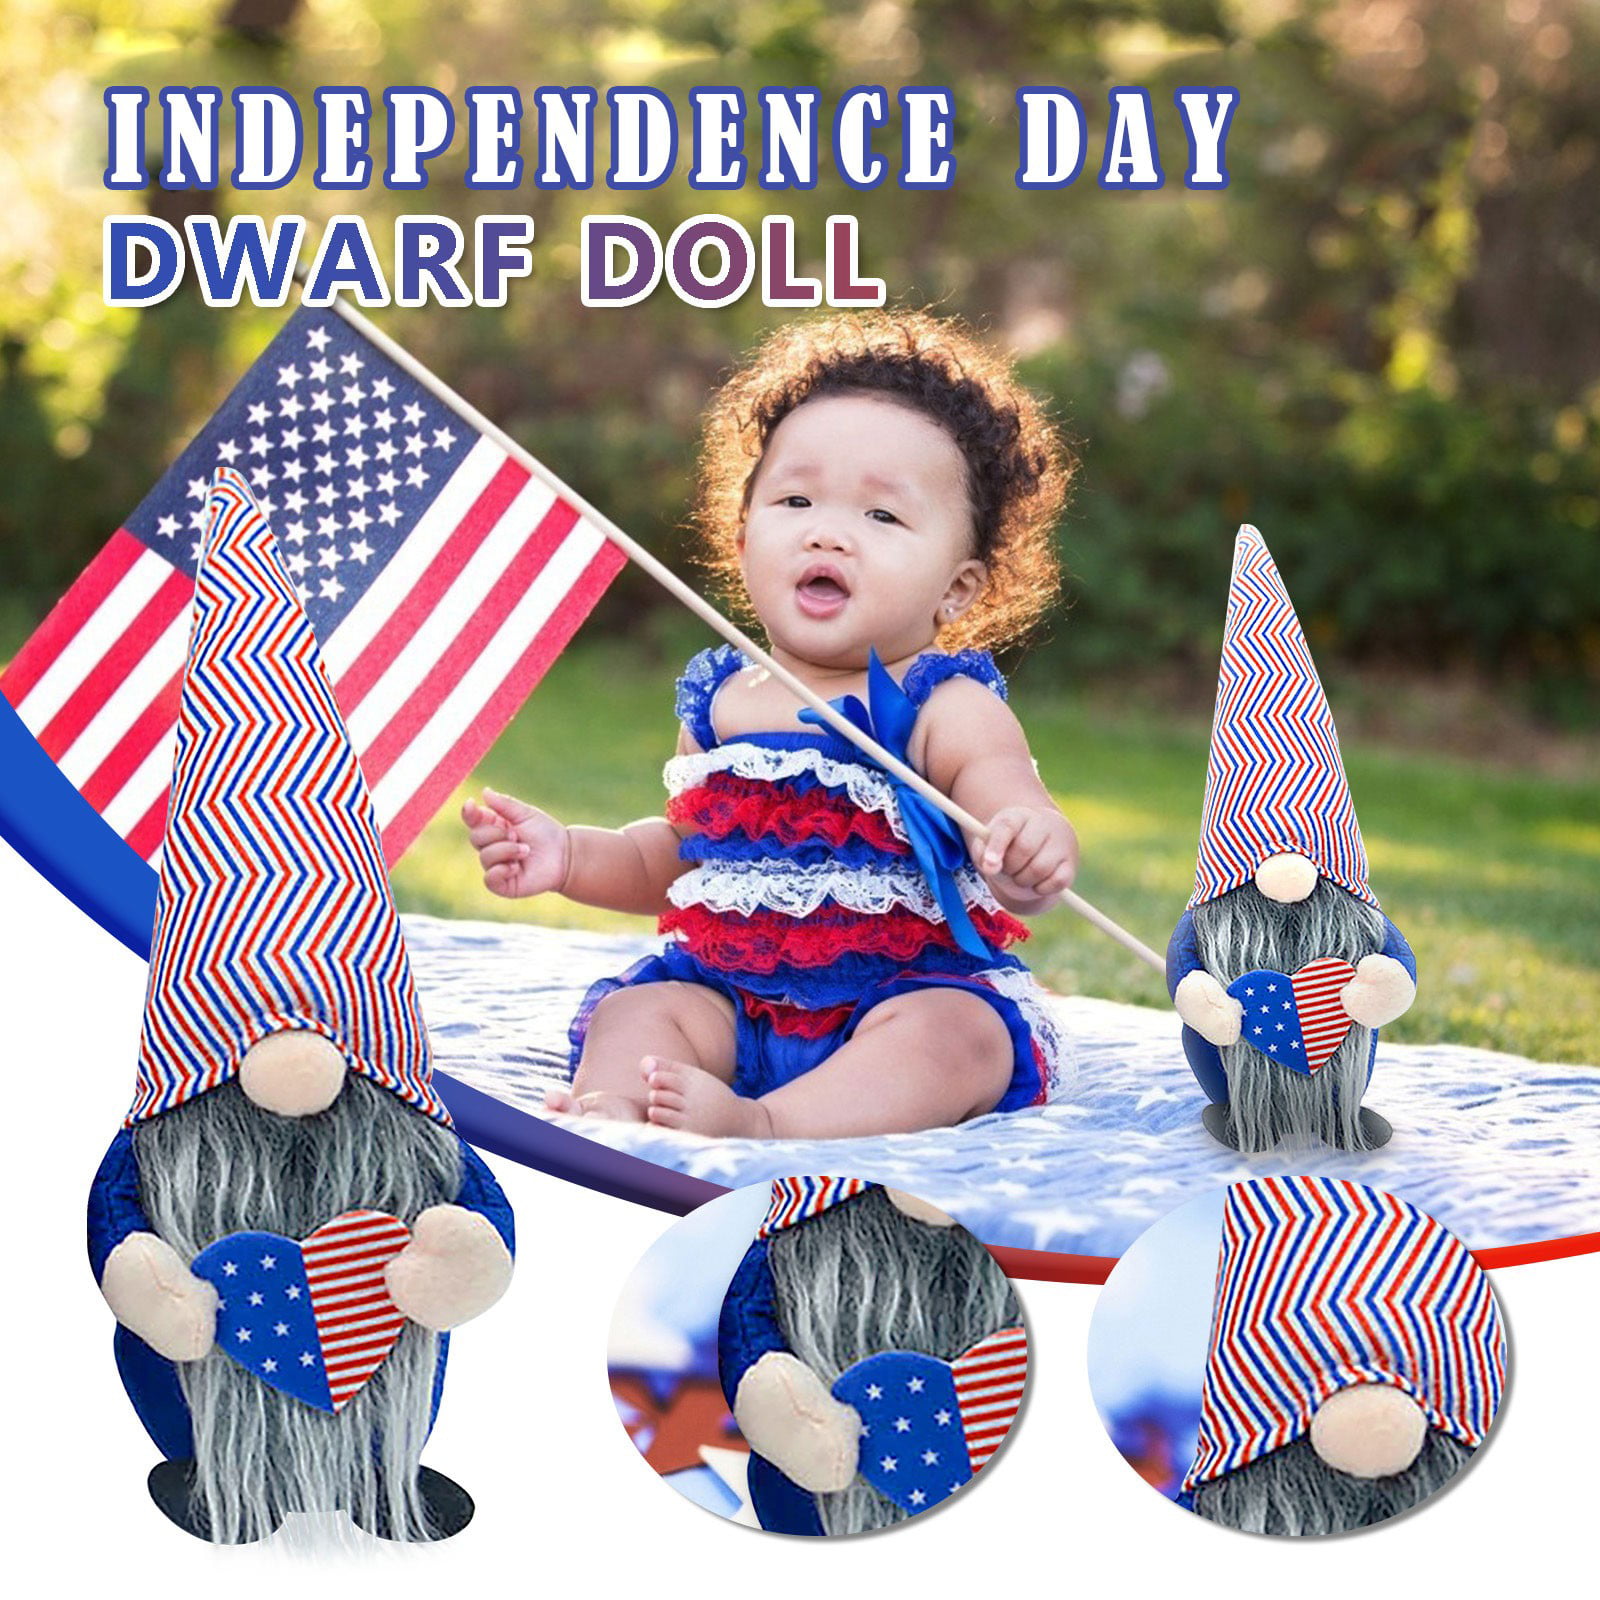 8 Pieces Patriotic Veterans Day Gnome American Gnome Independence Day Gnome 4th of July Decorations Handmade Dwarf Dolls Patriotic Party Supplies for Holiday Memorial Day Home Office Decoration 